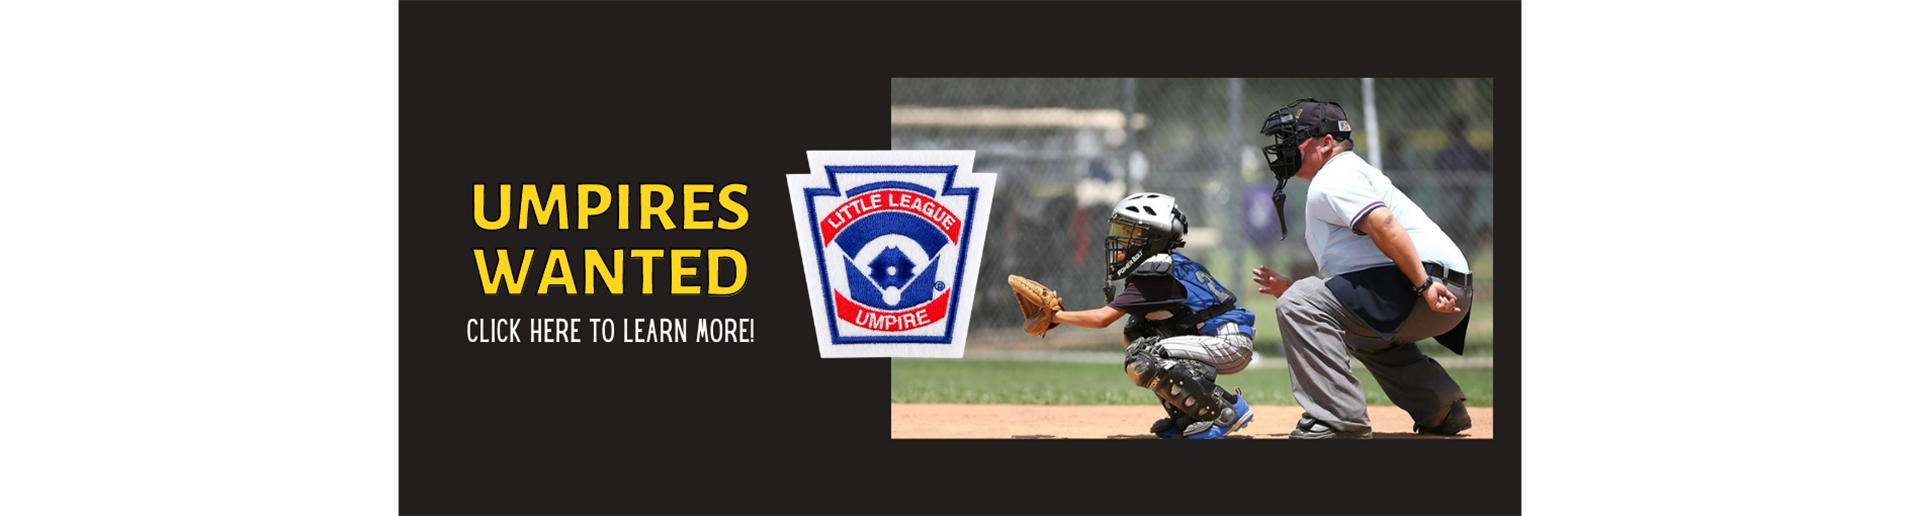 Uniform Buying Tips for the Purchasing Agent - Little League